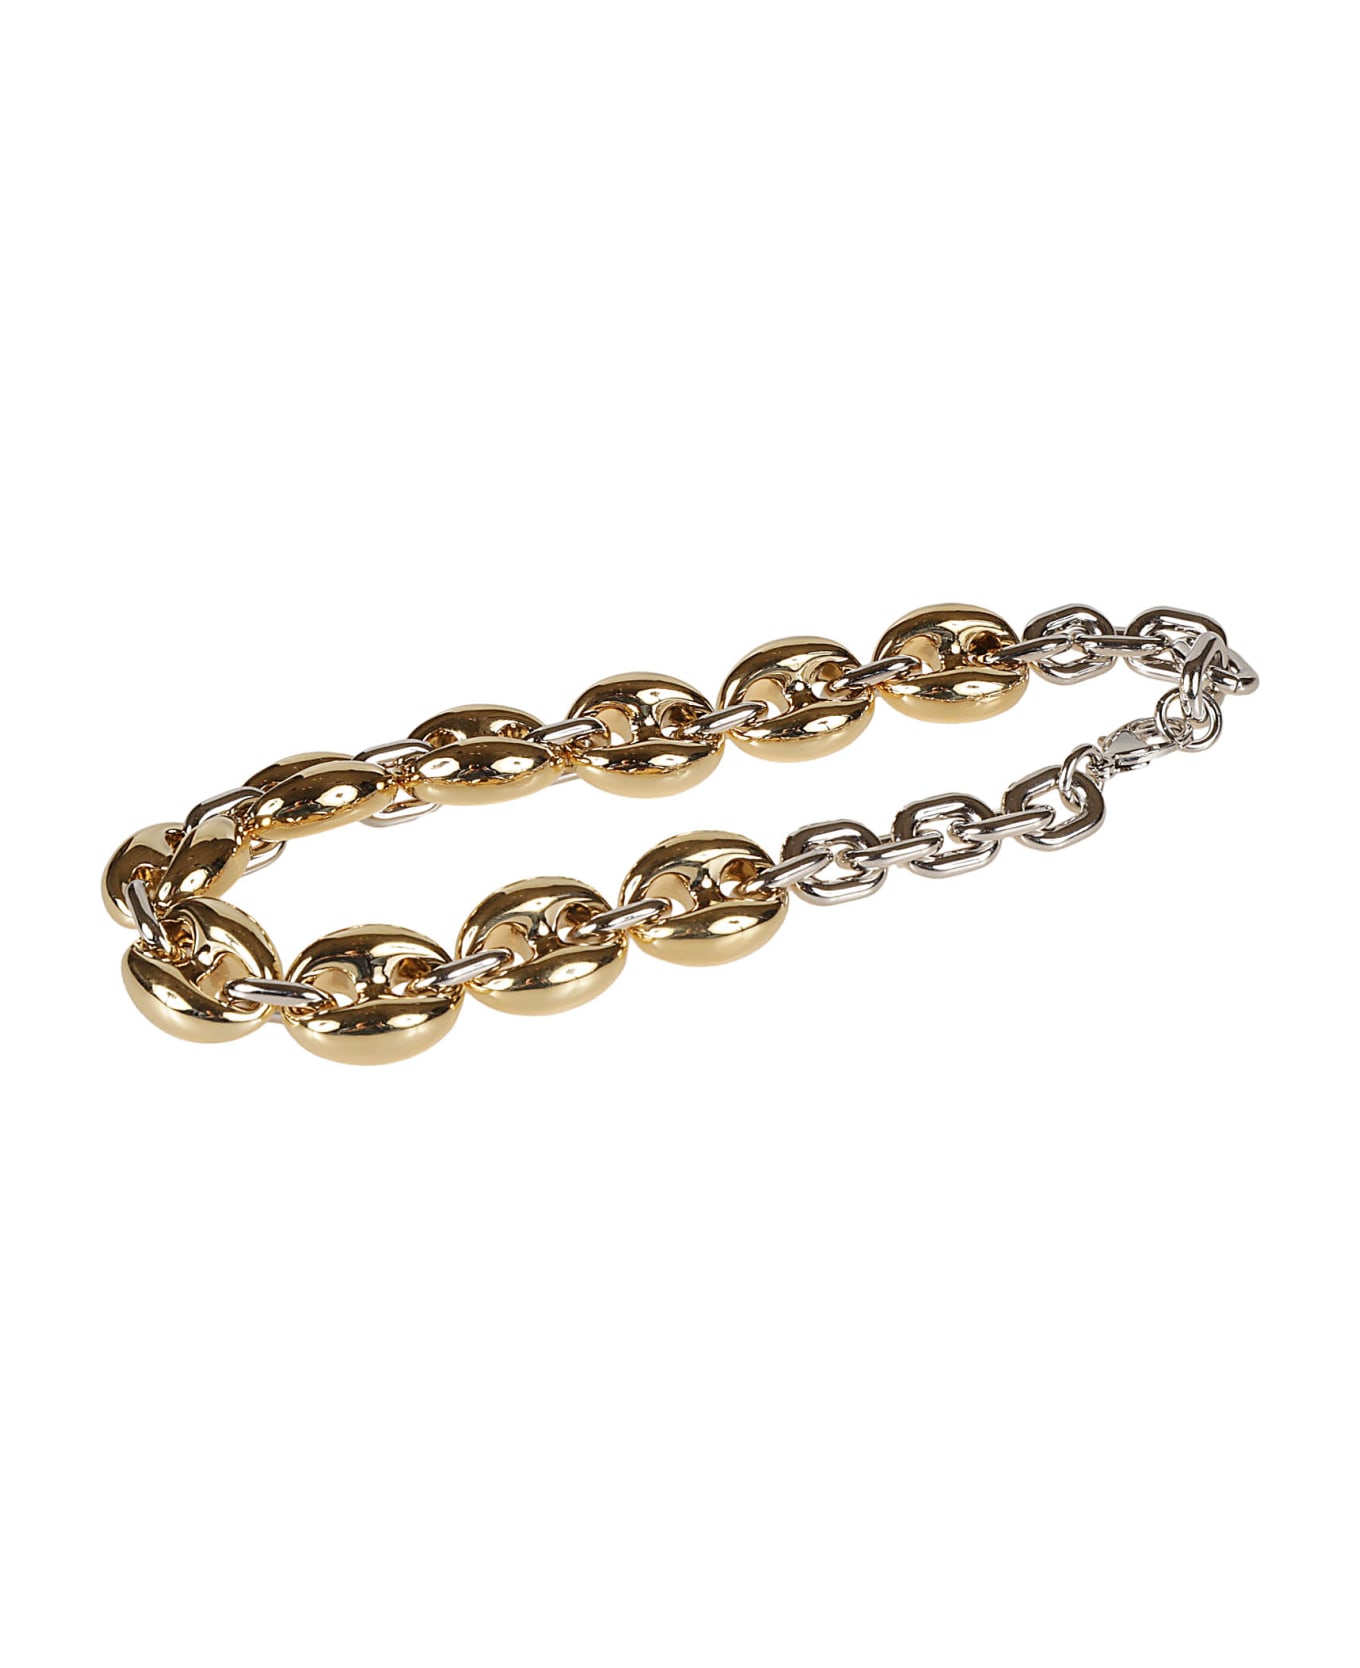 Paco Rabanne Two-tone Choker Necklace - Gold/Silver ネックレス